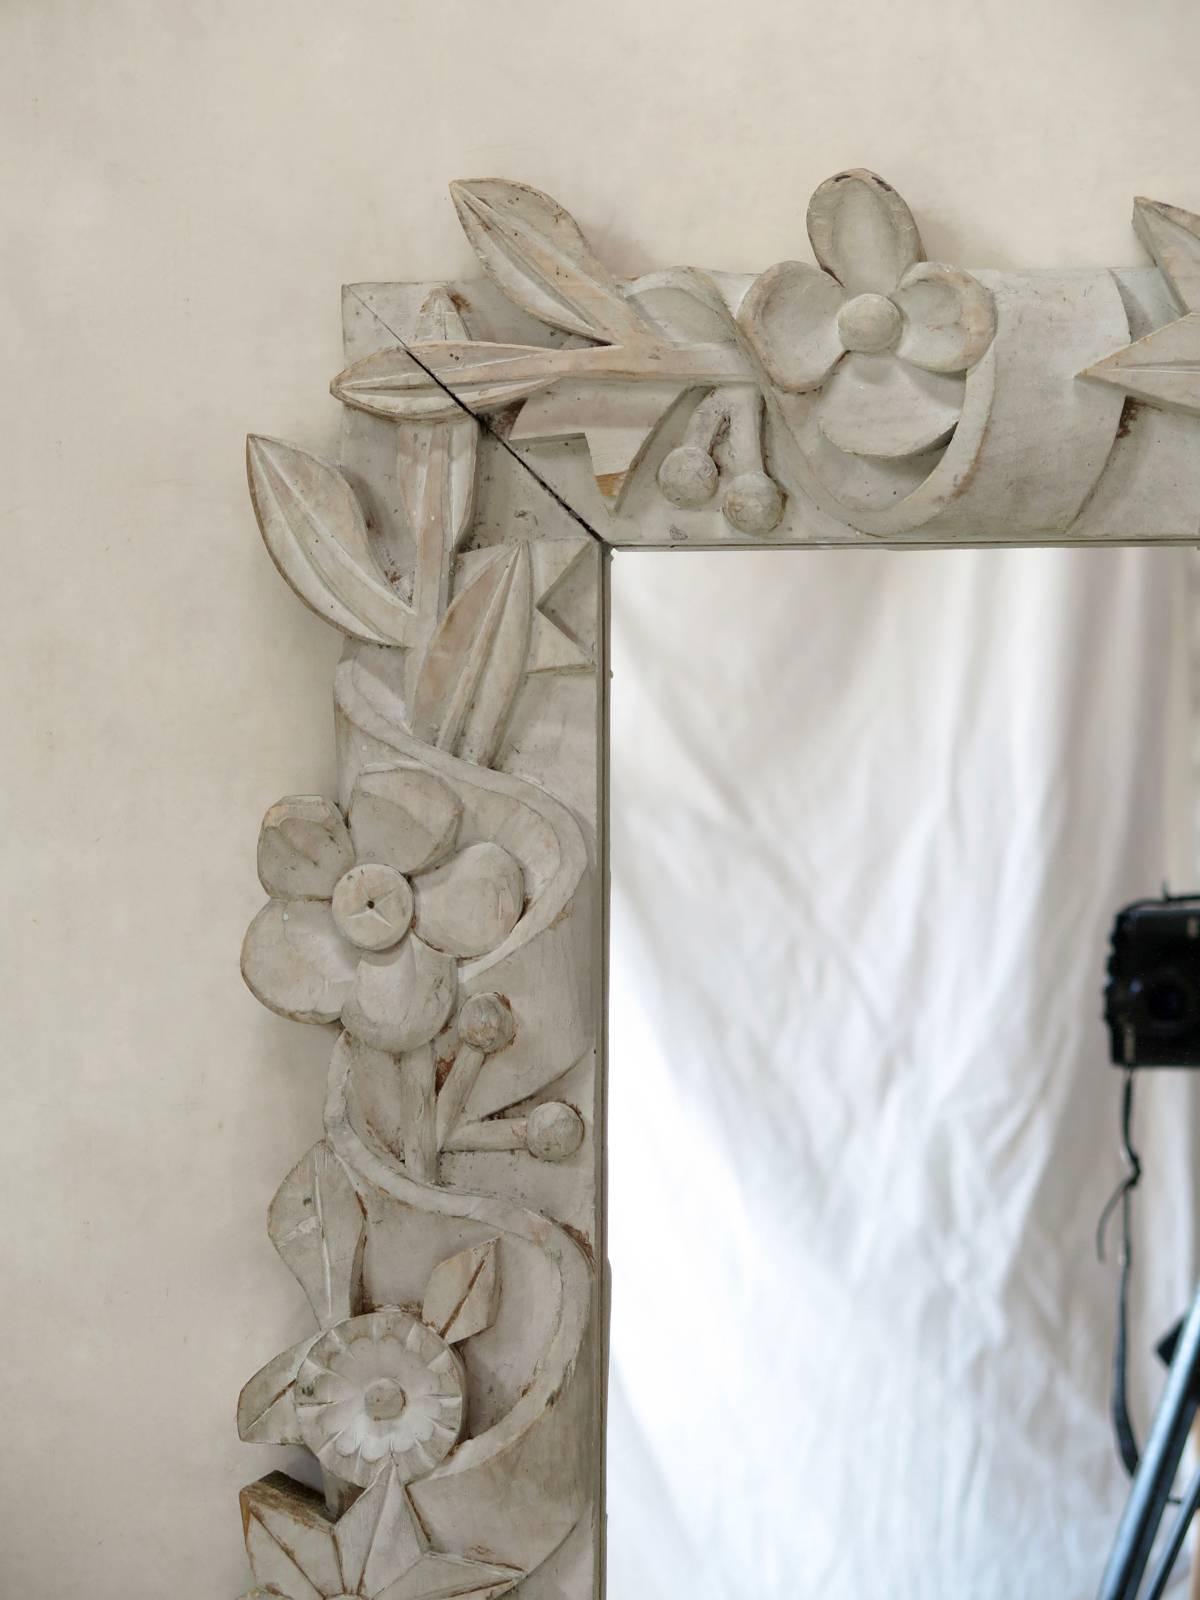 An unusual folk-art mirror, with a chunky, carved frame decorated with ribbons, leaves, flowers and stars. The frame is fairly thick, and painted off-white.